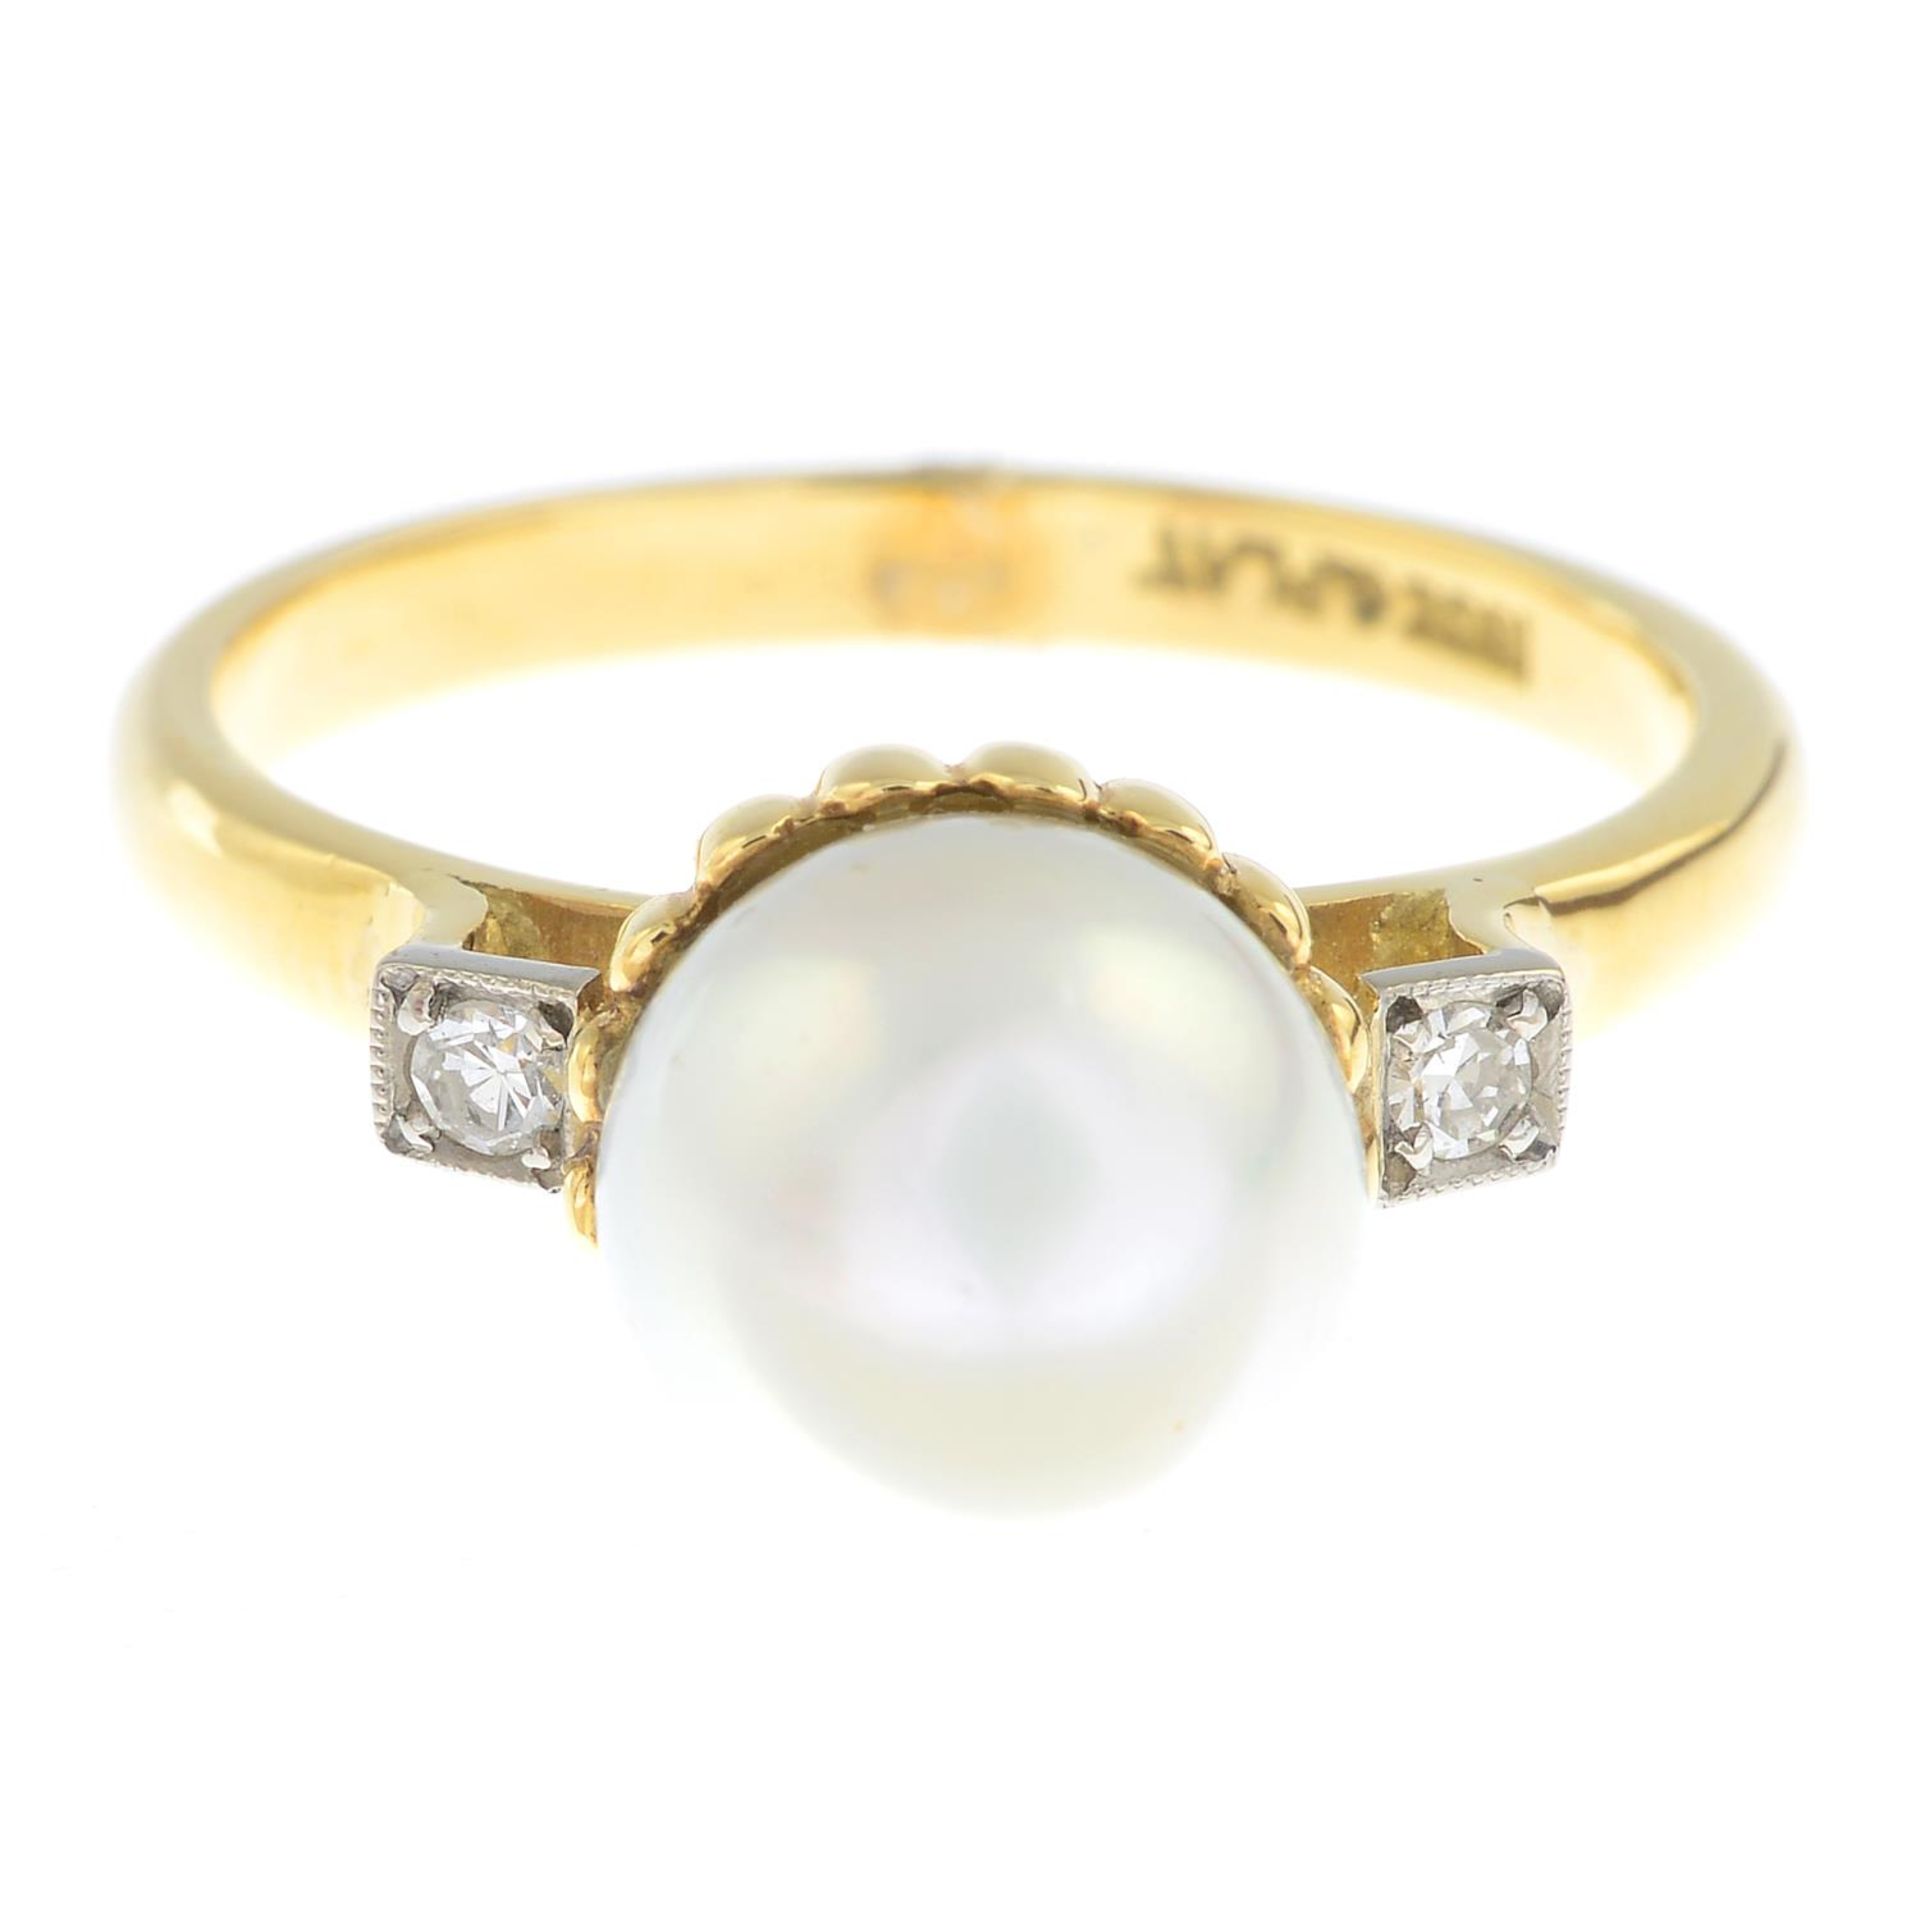 A cultured pearl and diamond three-stone ring.Cultured pearl measuring 8mms.